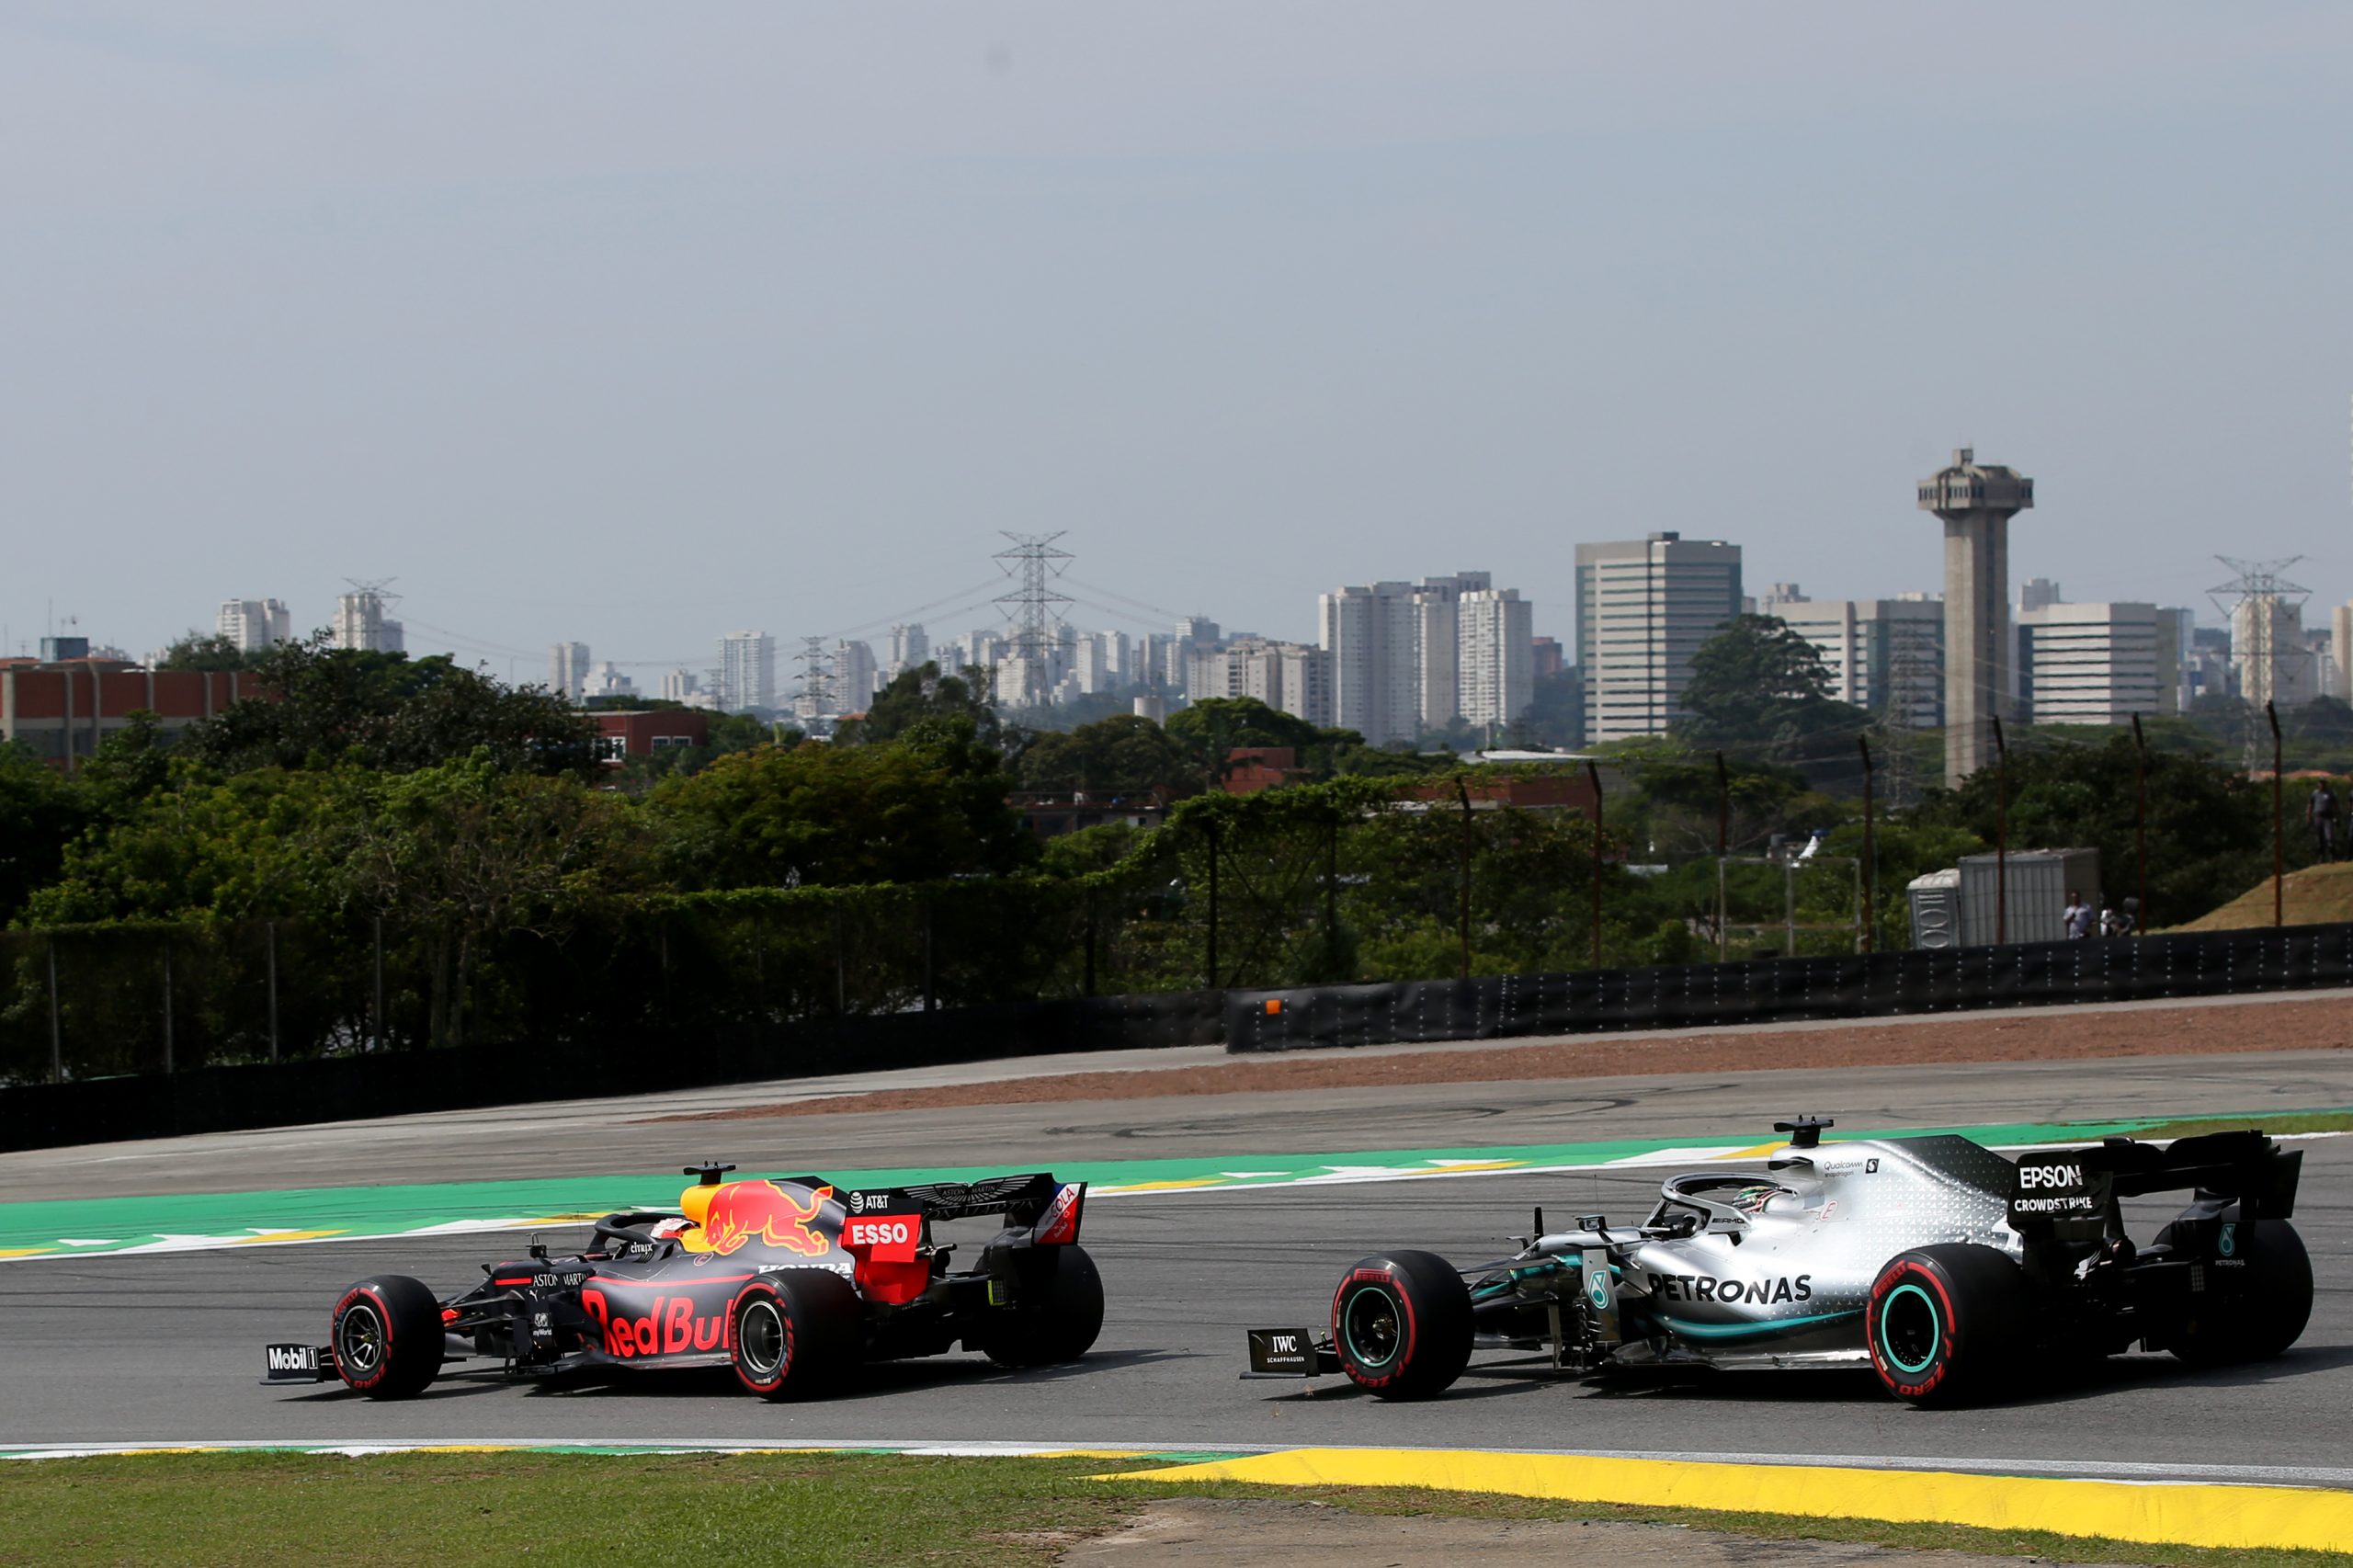 The FIA Deny Mercedes Request for ‘Right of Review’ Allowing Max Verstappen’s Lap 48 Defence Against Lewis Hamilton to go Unpunished